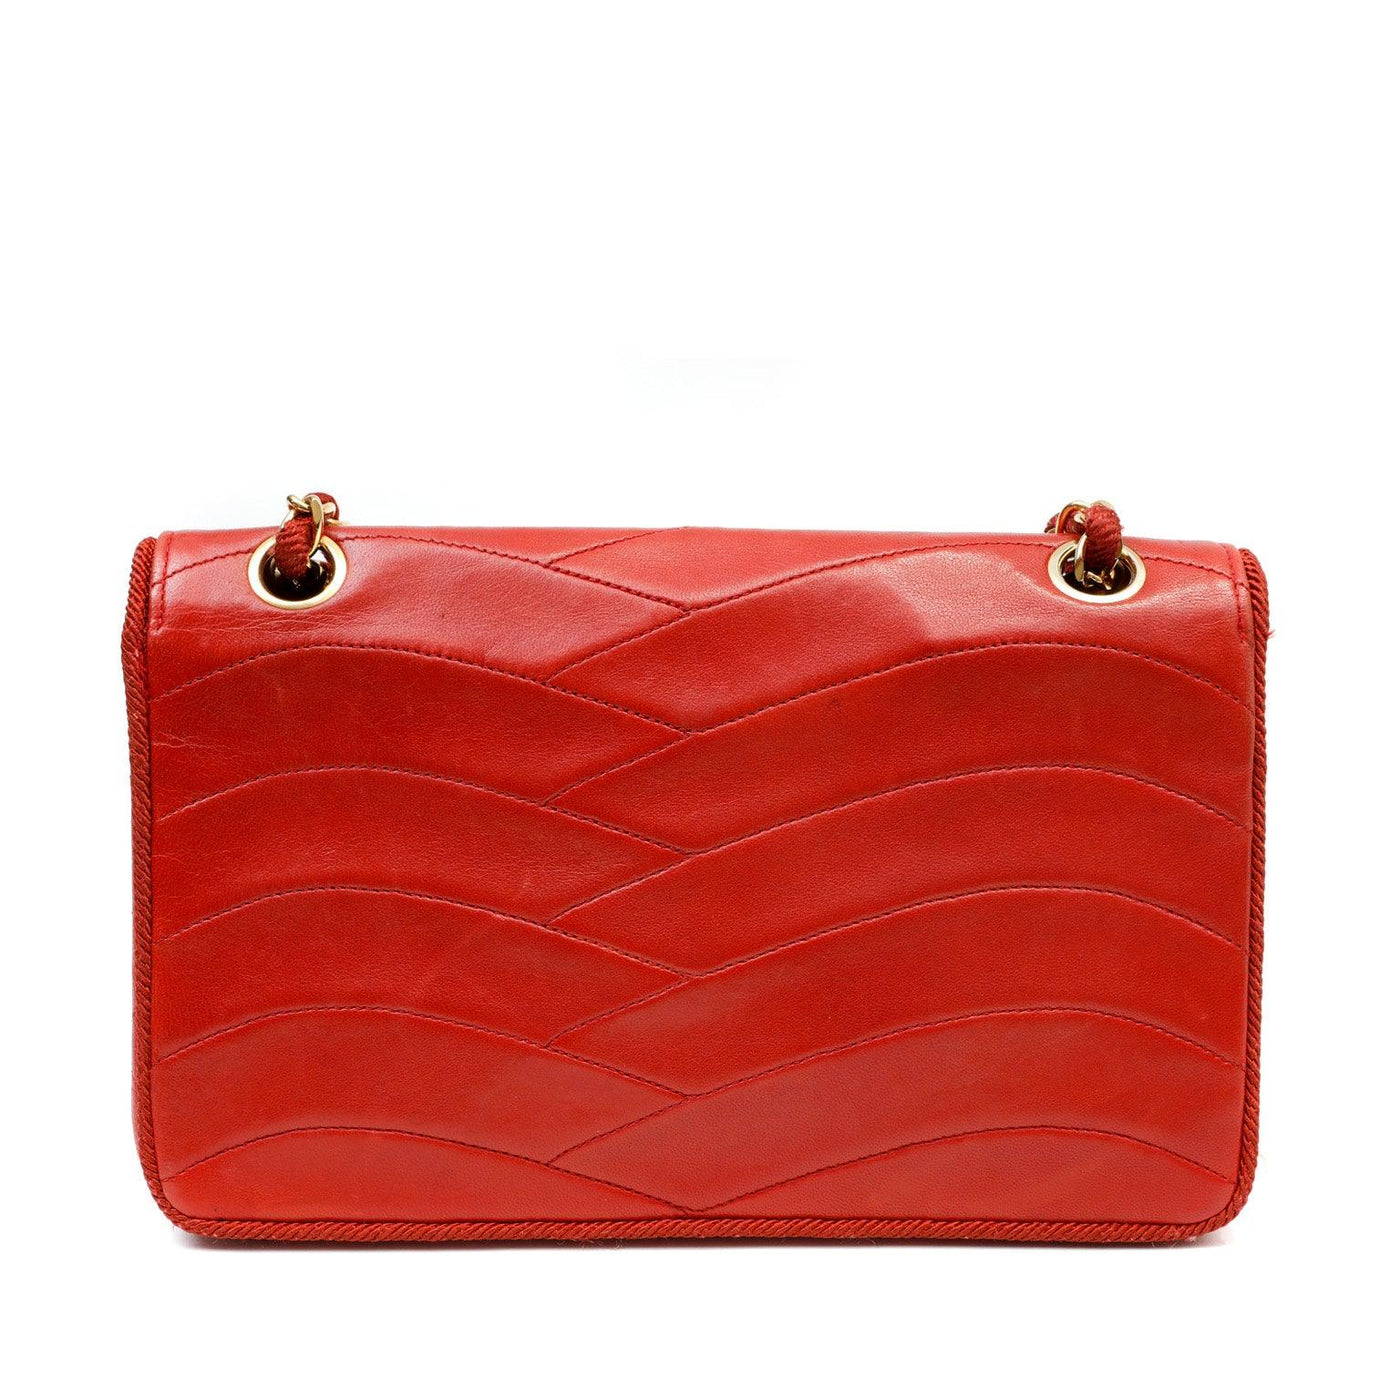 Chanel Vintage Red Leather Scallop Quilted Flap Bag - Only Authentics